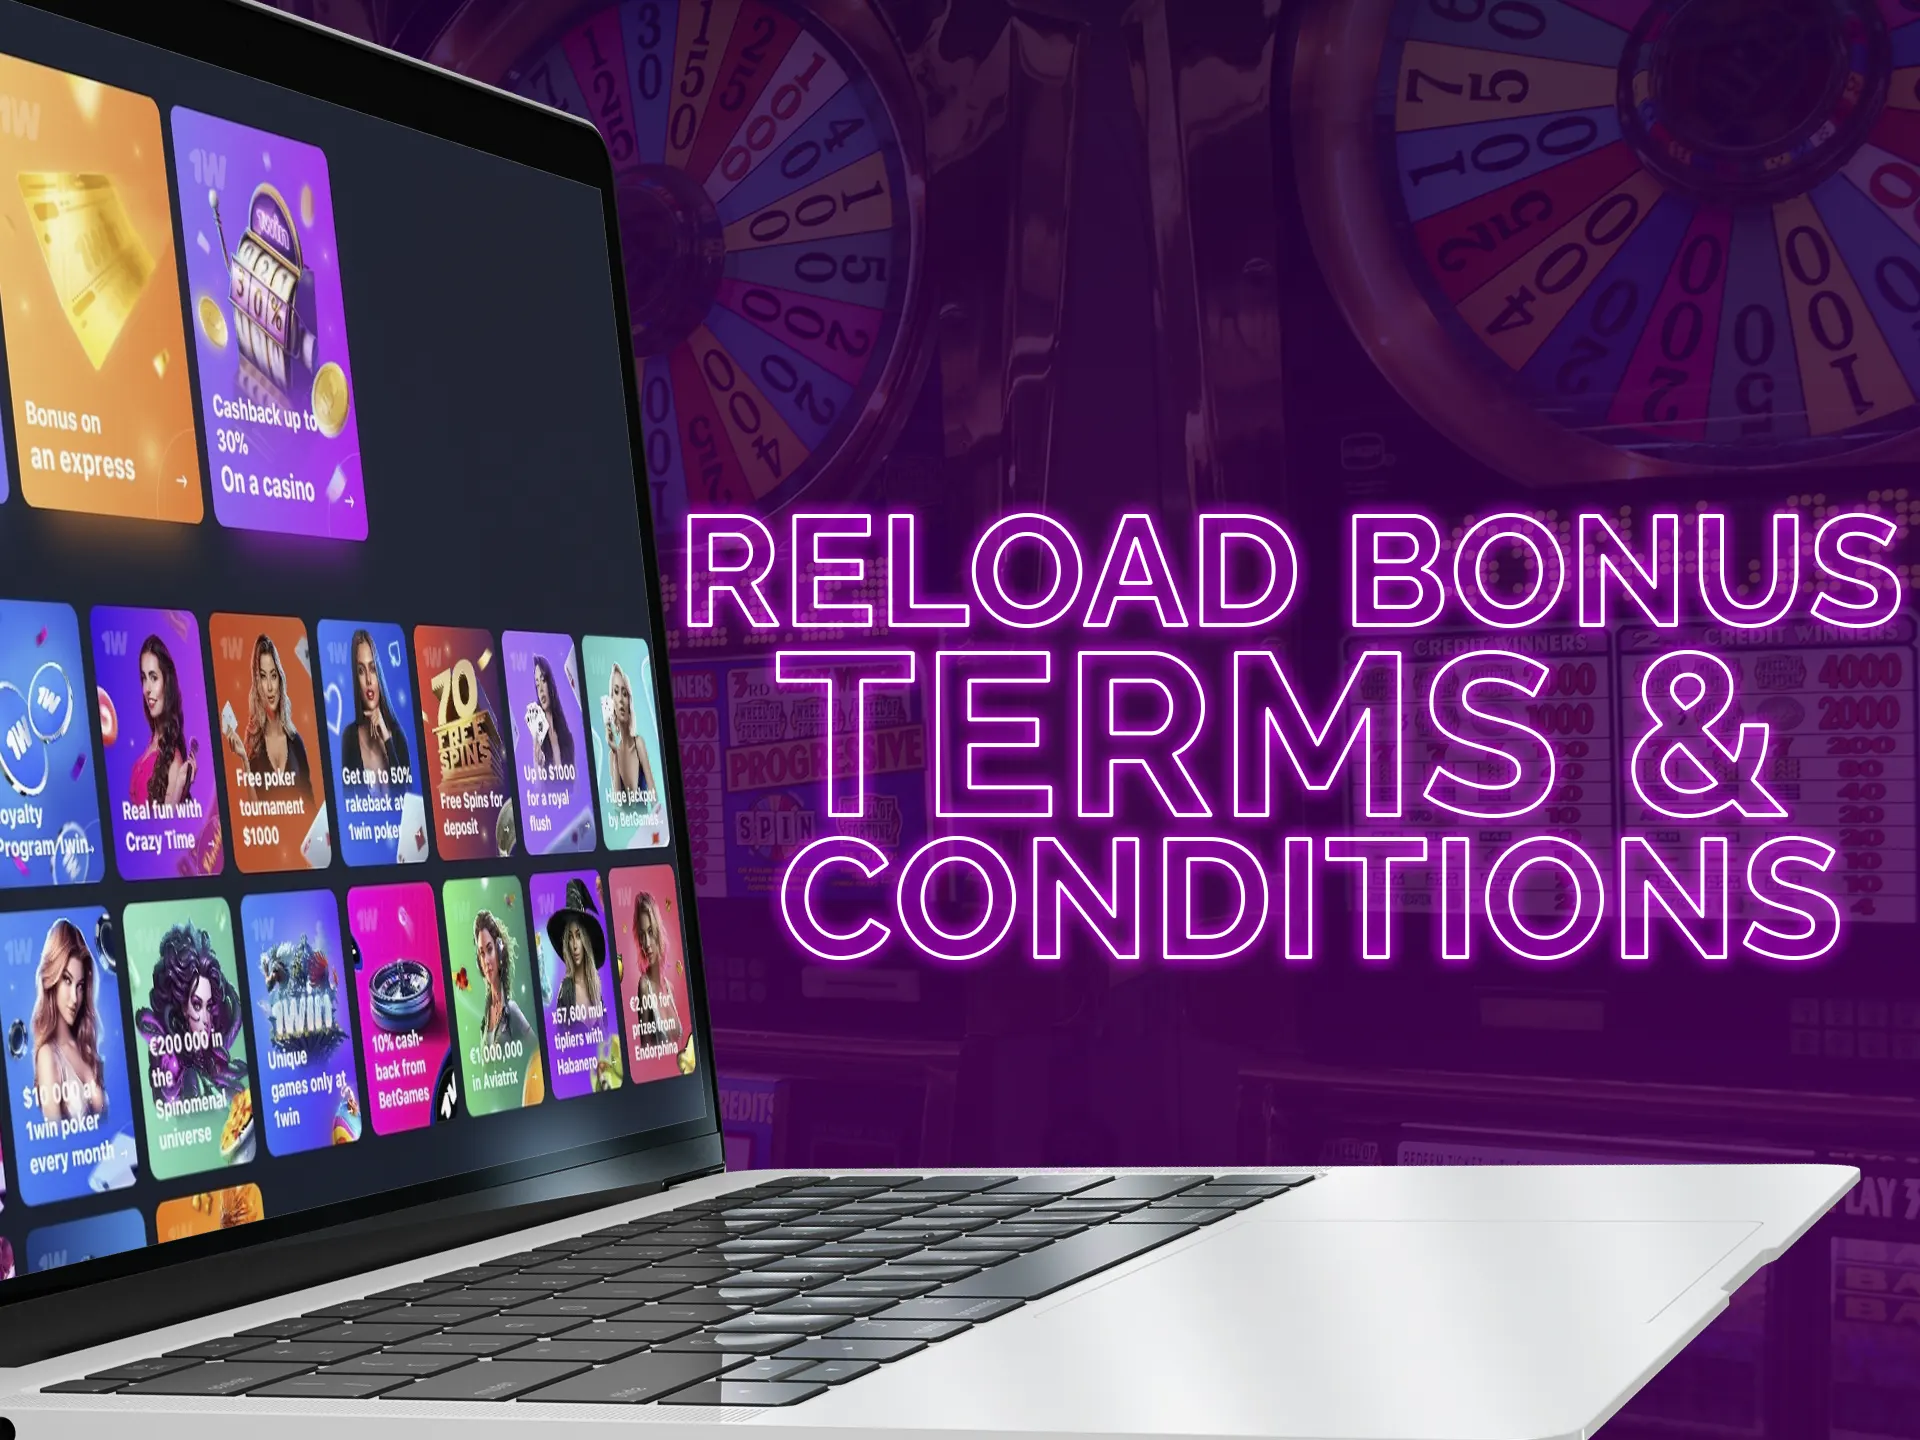 Find out the terms and conditions of reload bonuses.